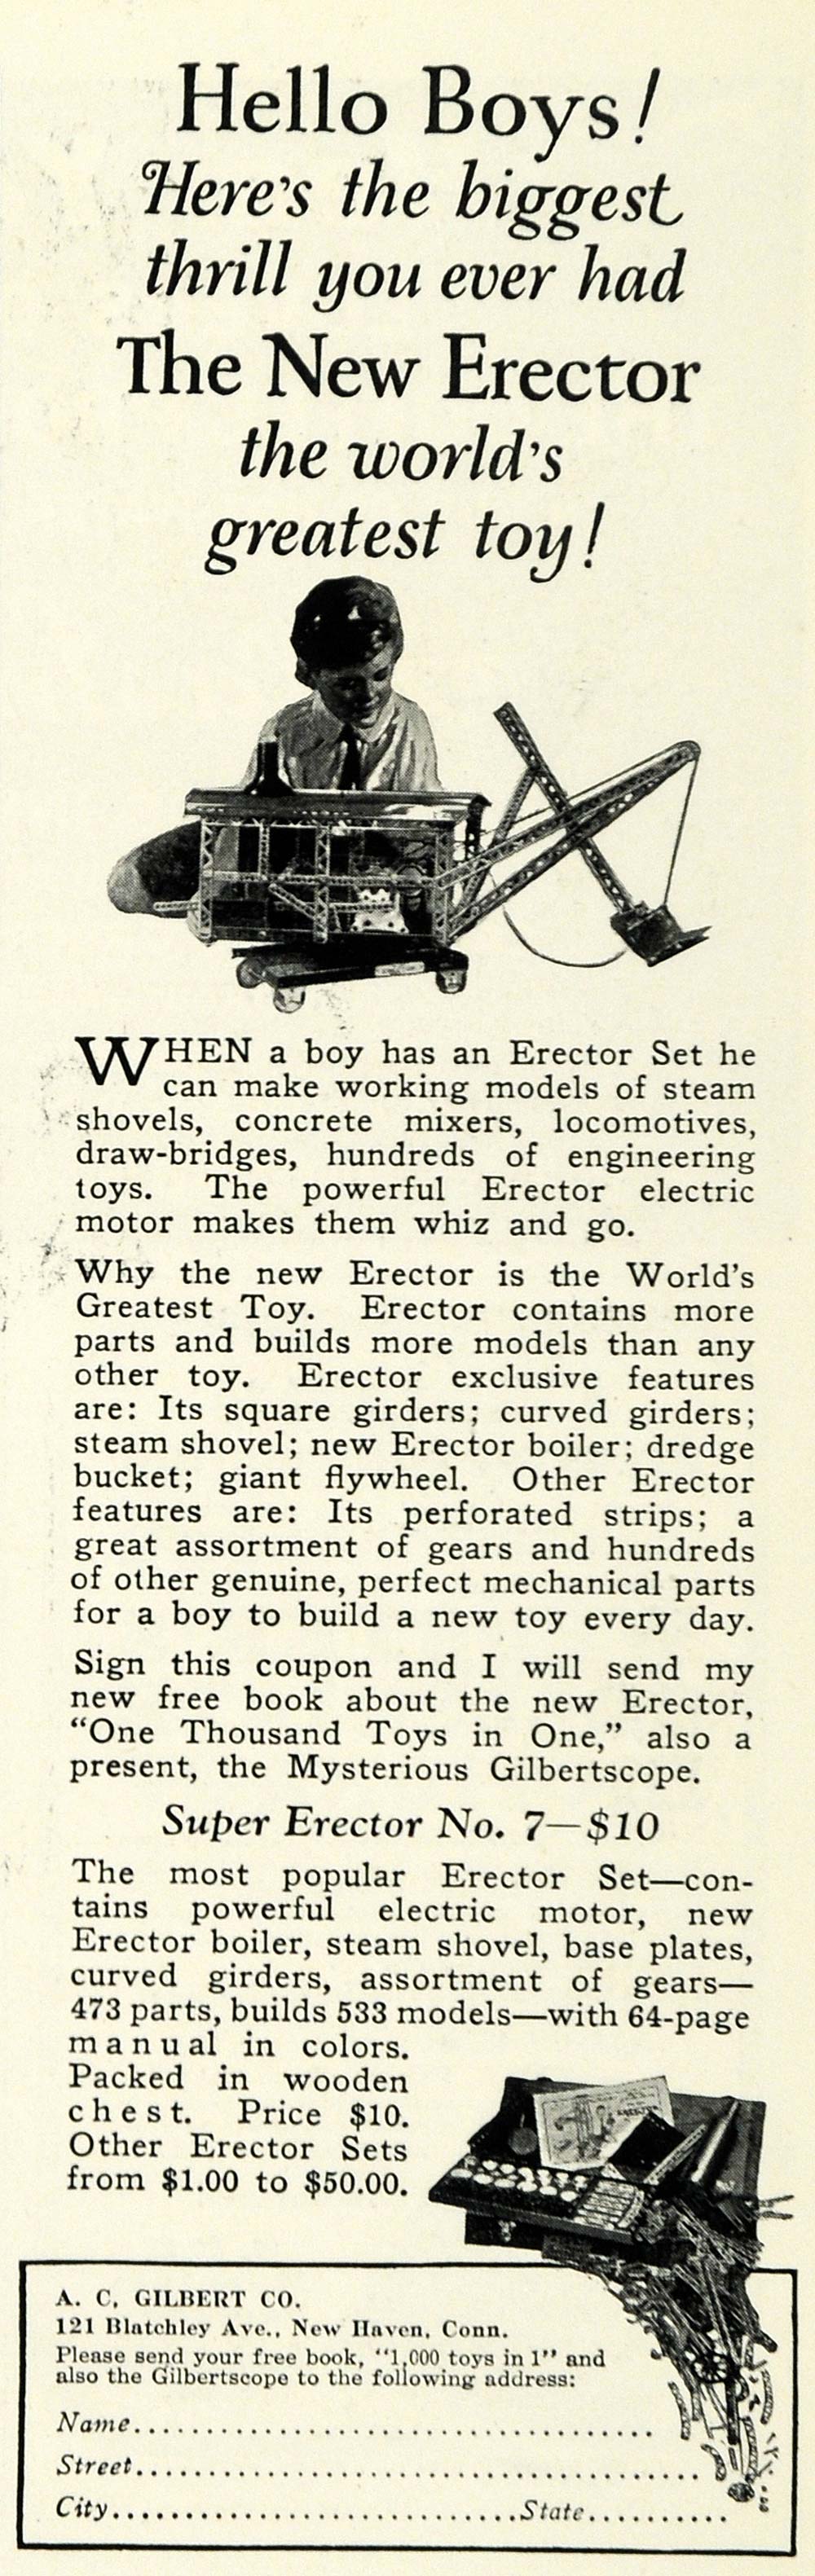 1925 Ad A C Gilbert New Haven Erector Toy Dredge Industrial Car Tools Child NGM1